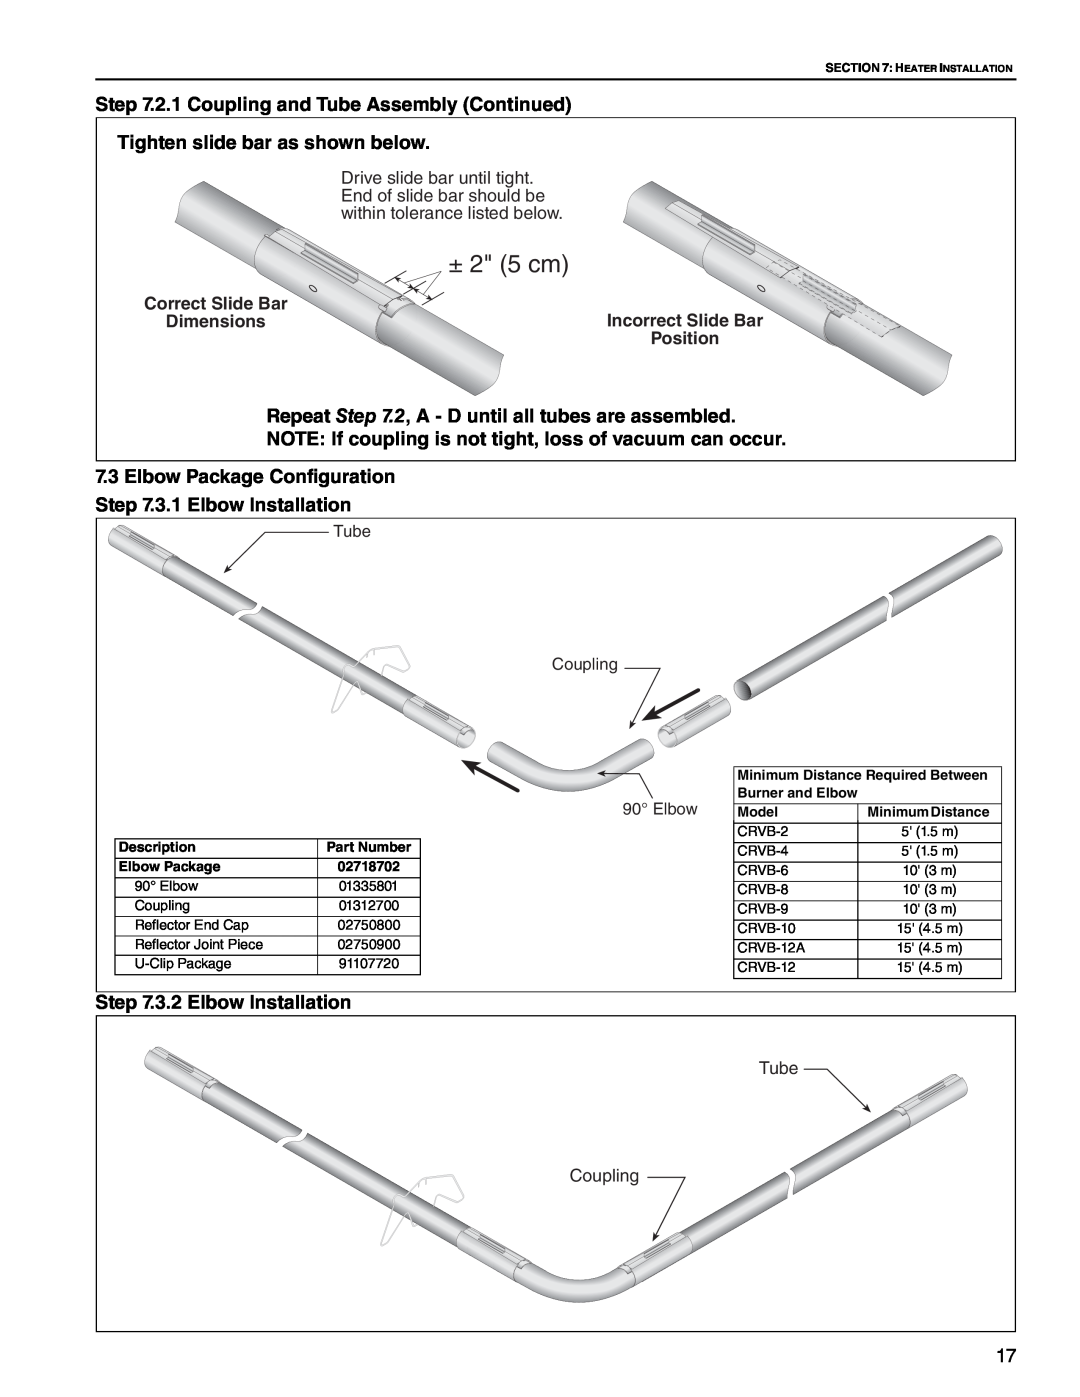 Roberts Gorden CRV-B-4 2.1 Coupling and Tube Assembly Continued, Tighten slide bar as shown below, 3.2 Elbow Installation 